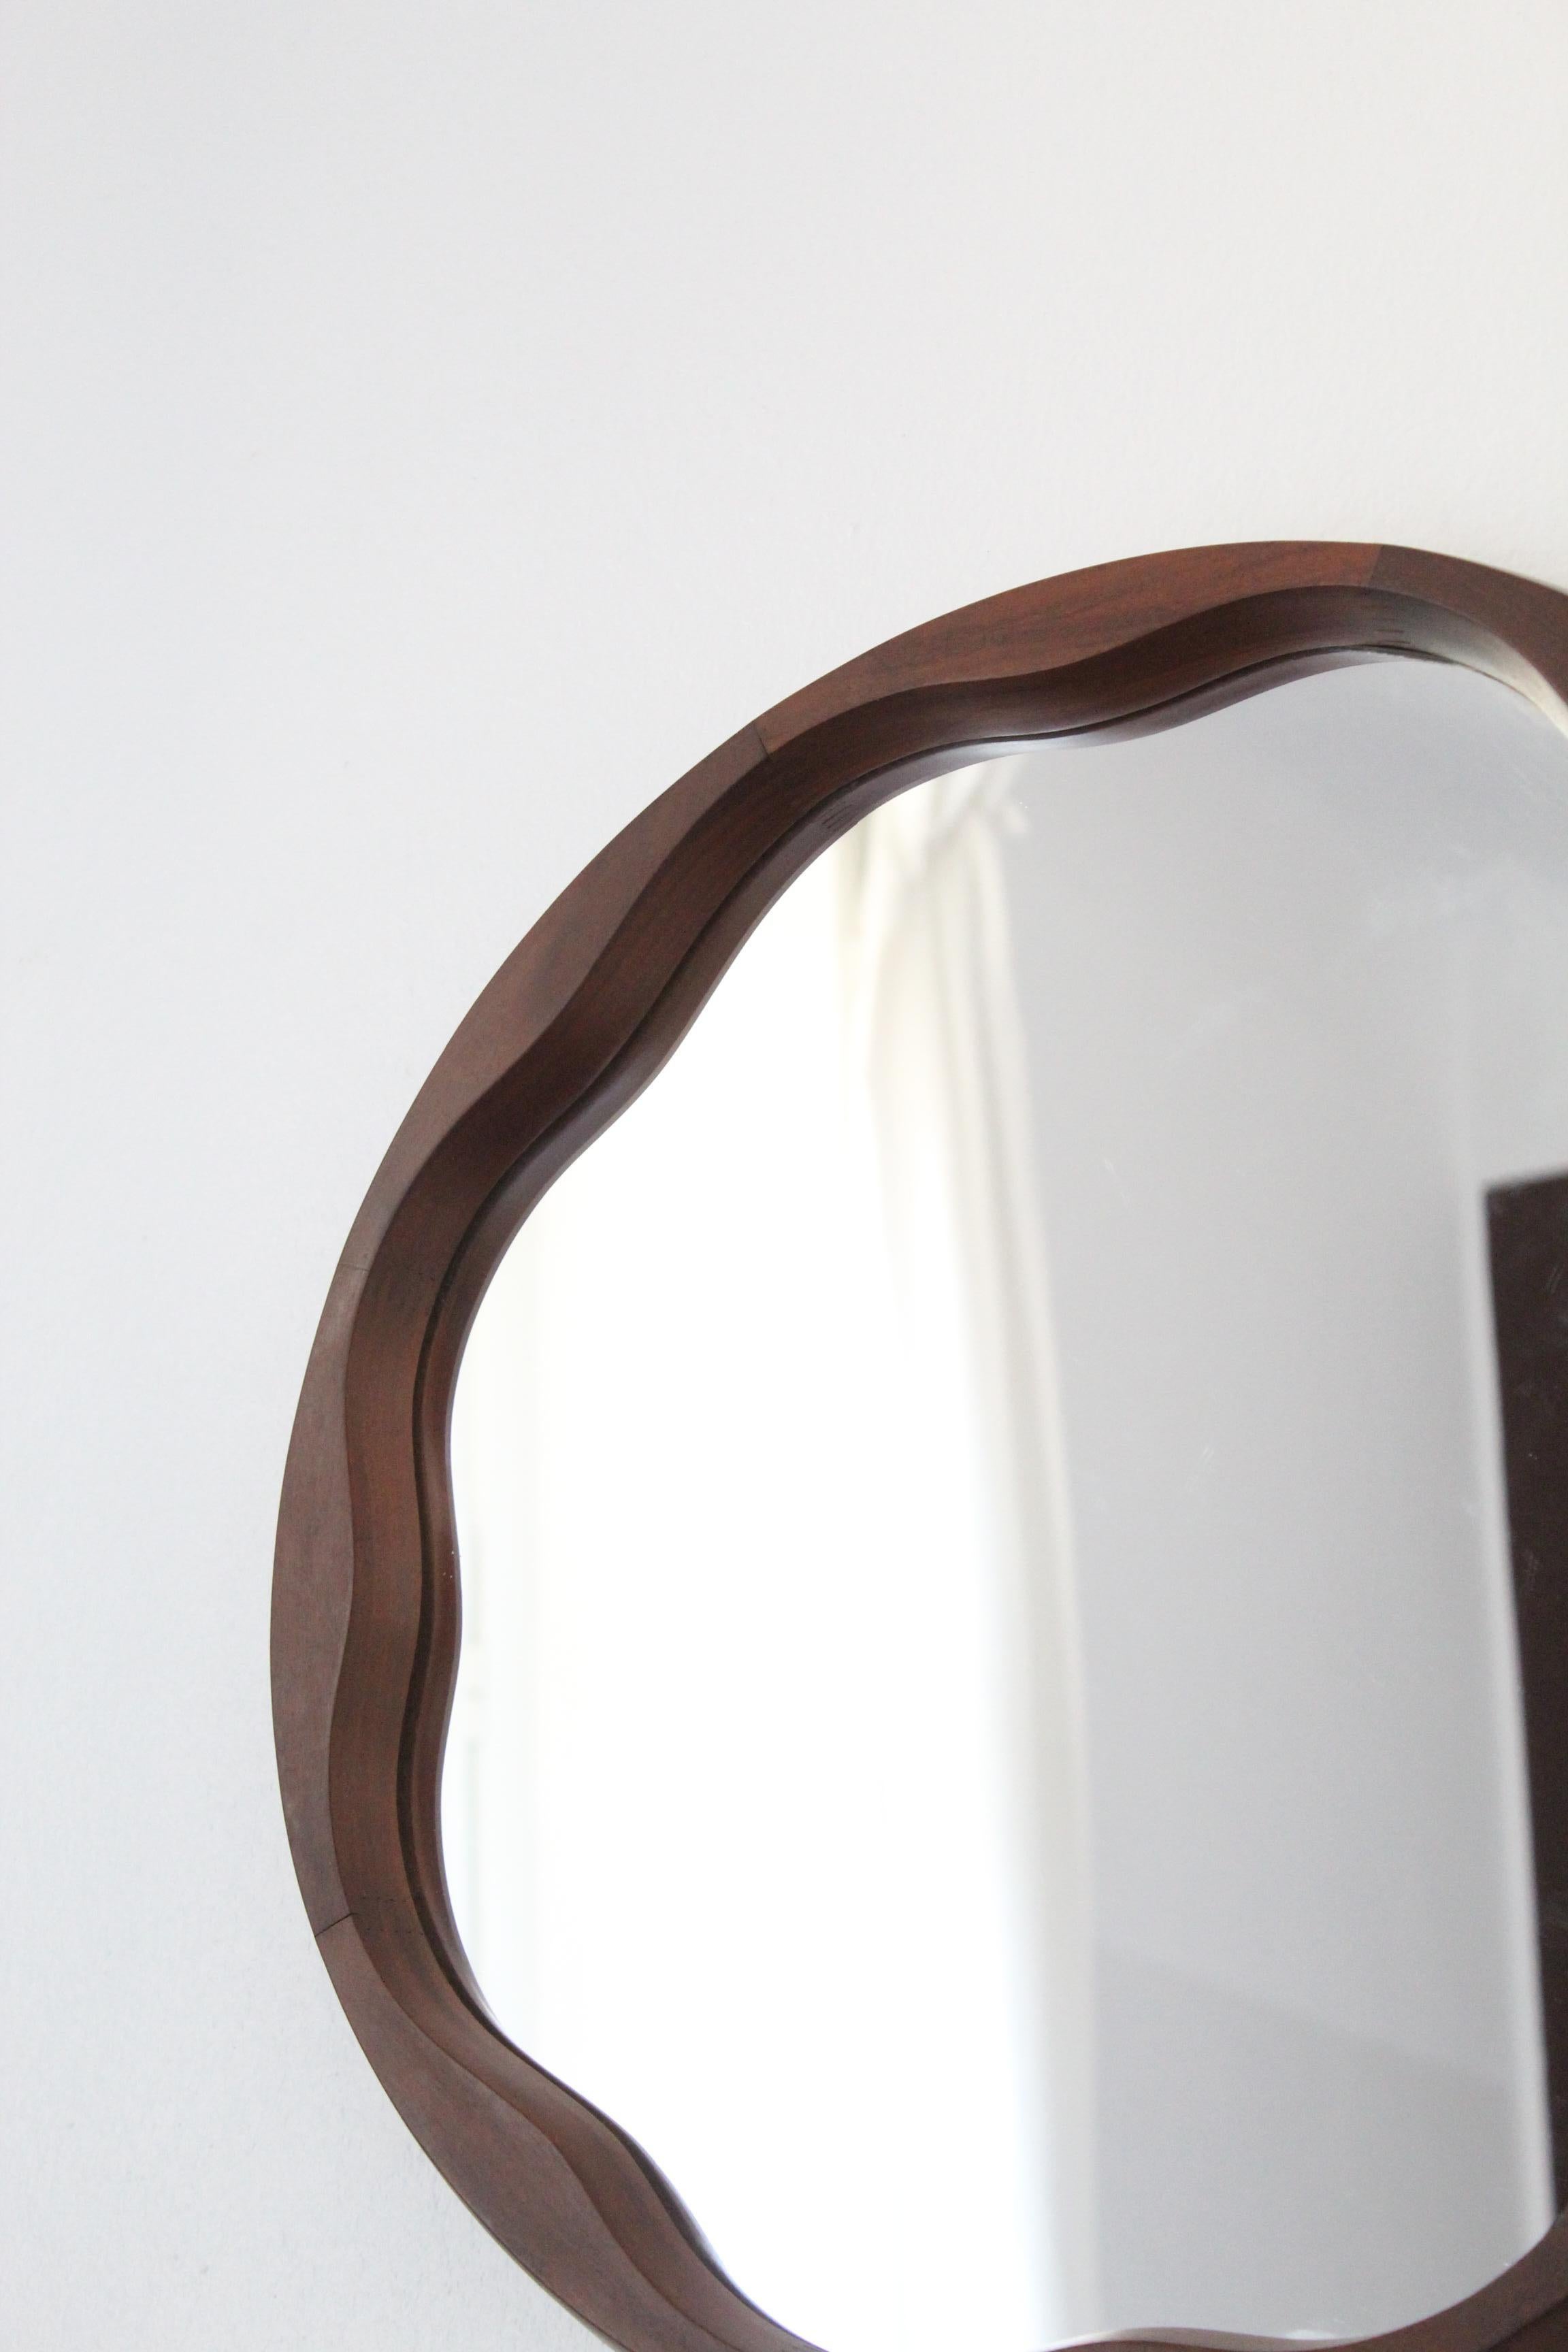 A round organic wall mirror, produced in Italy, 1950s. Cut mirror glass is framed in walnut.

Other designers of the period include Gio Ponti, Fontana Arte, Max Ingrand, Jean Royère, and Josef Frank.